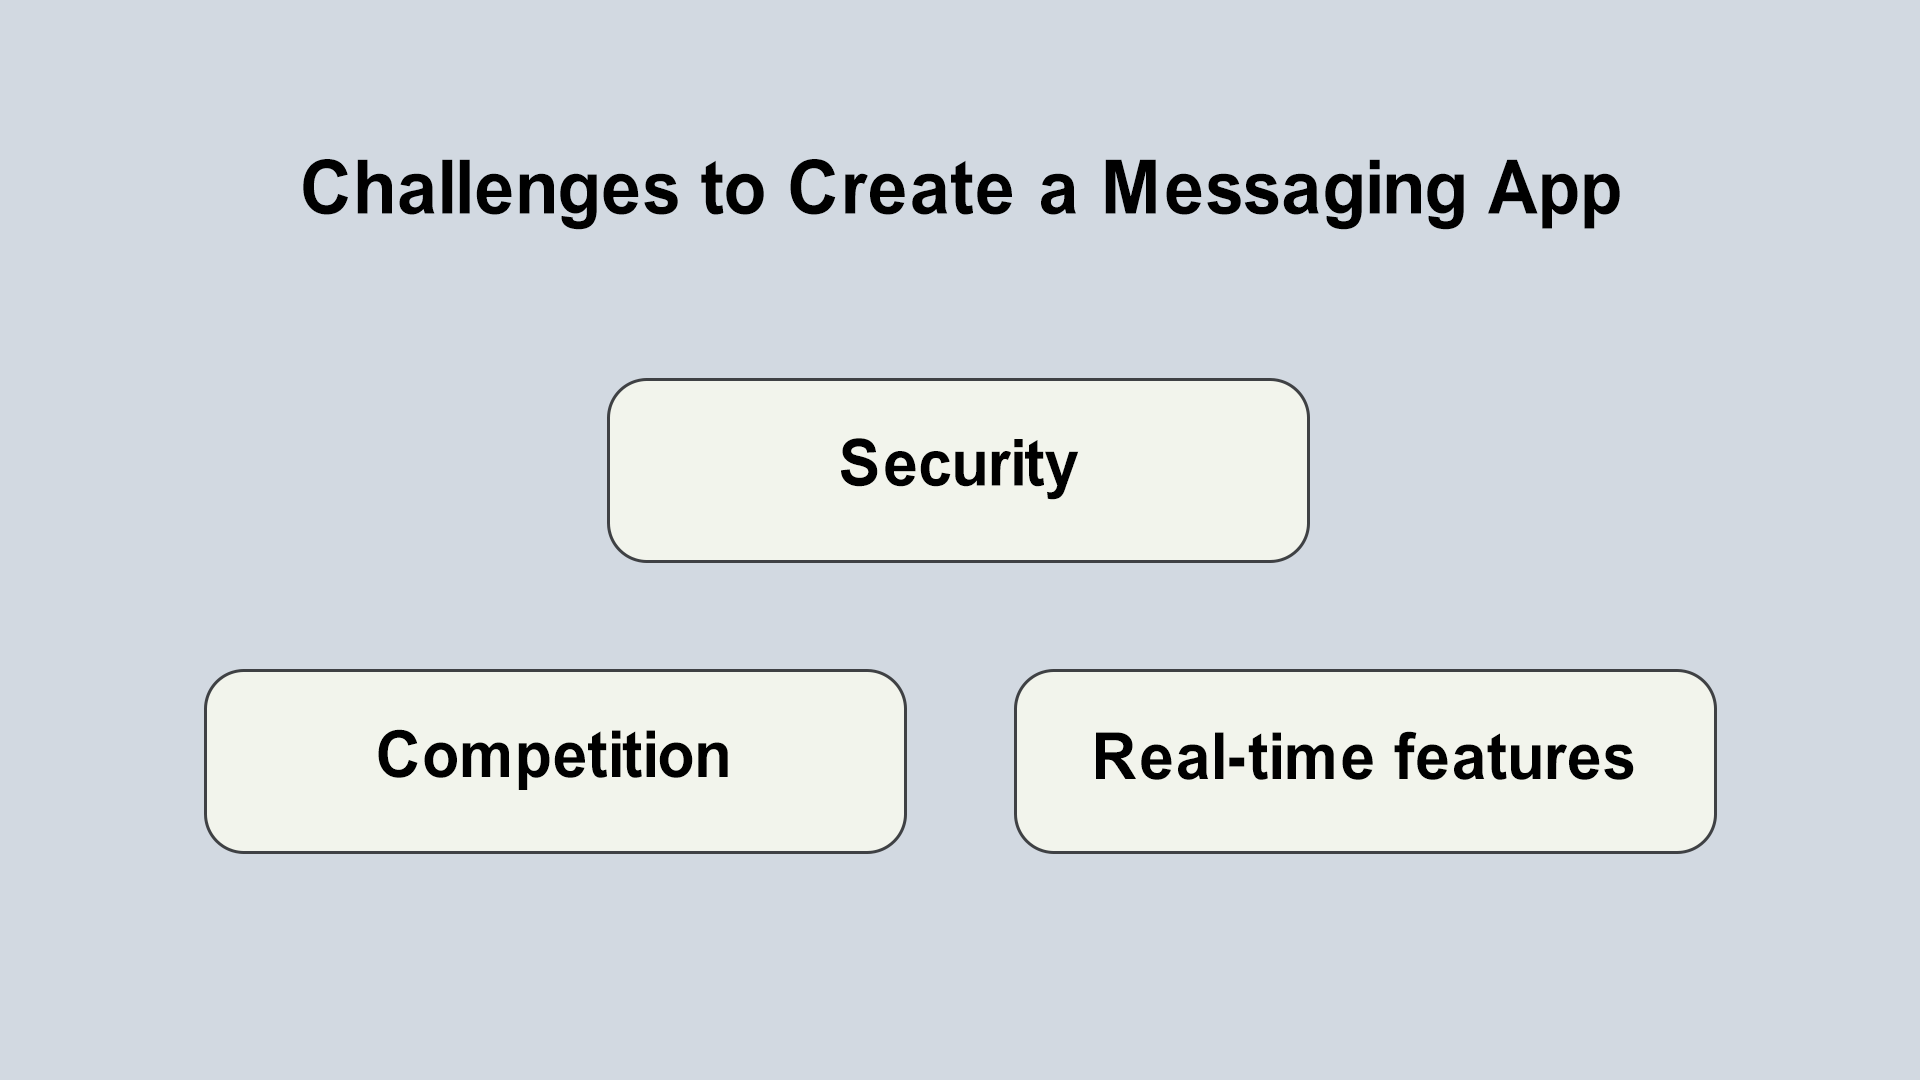 How Much Does It Cost to Build a Messaging App? 3